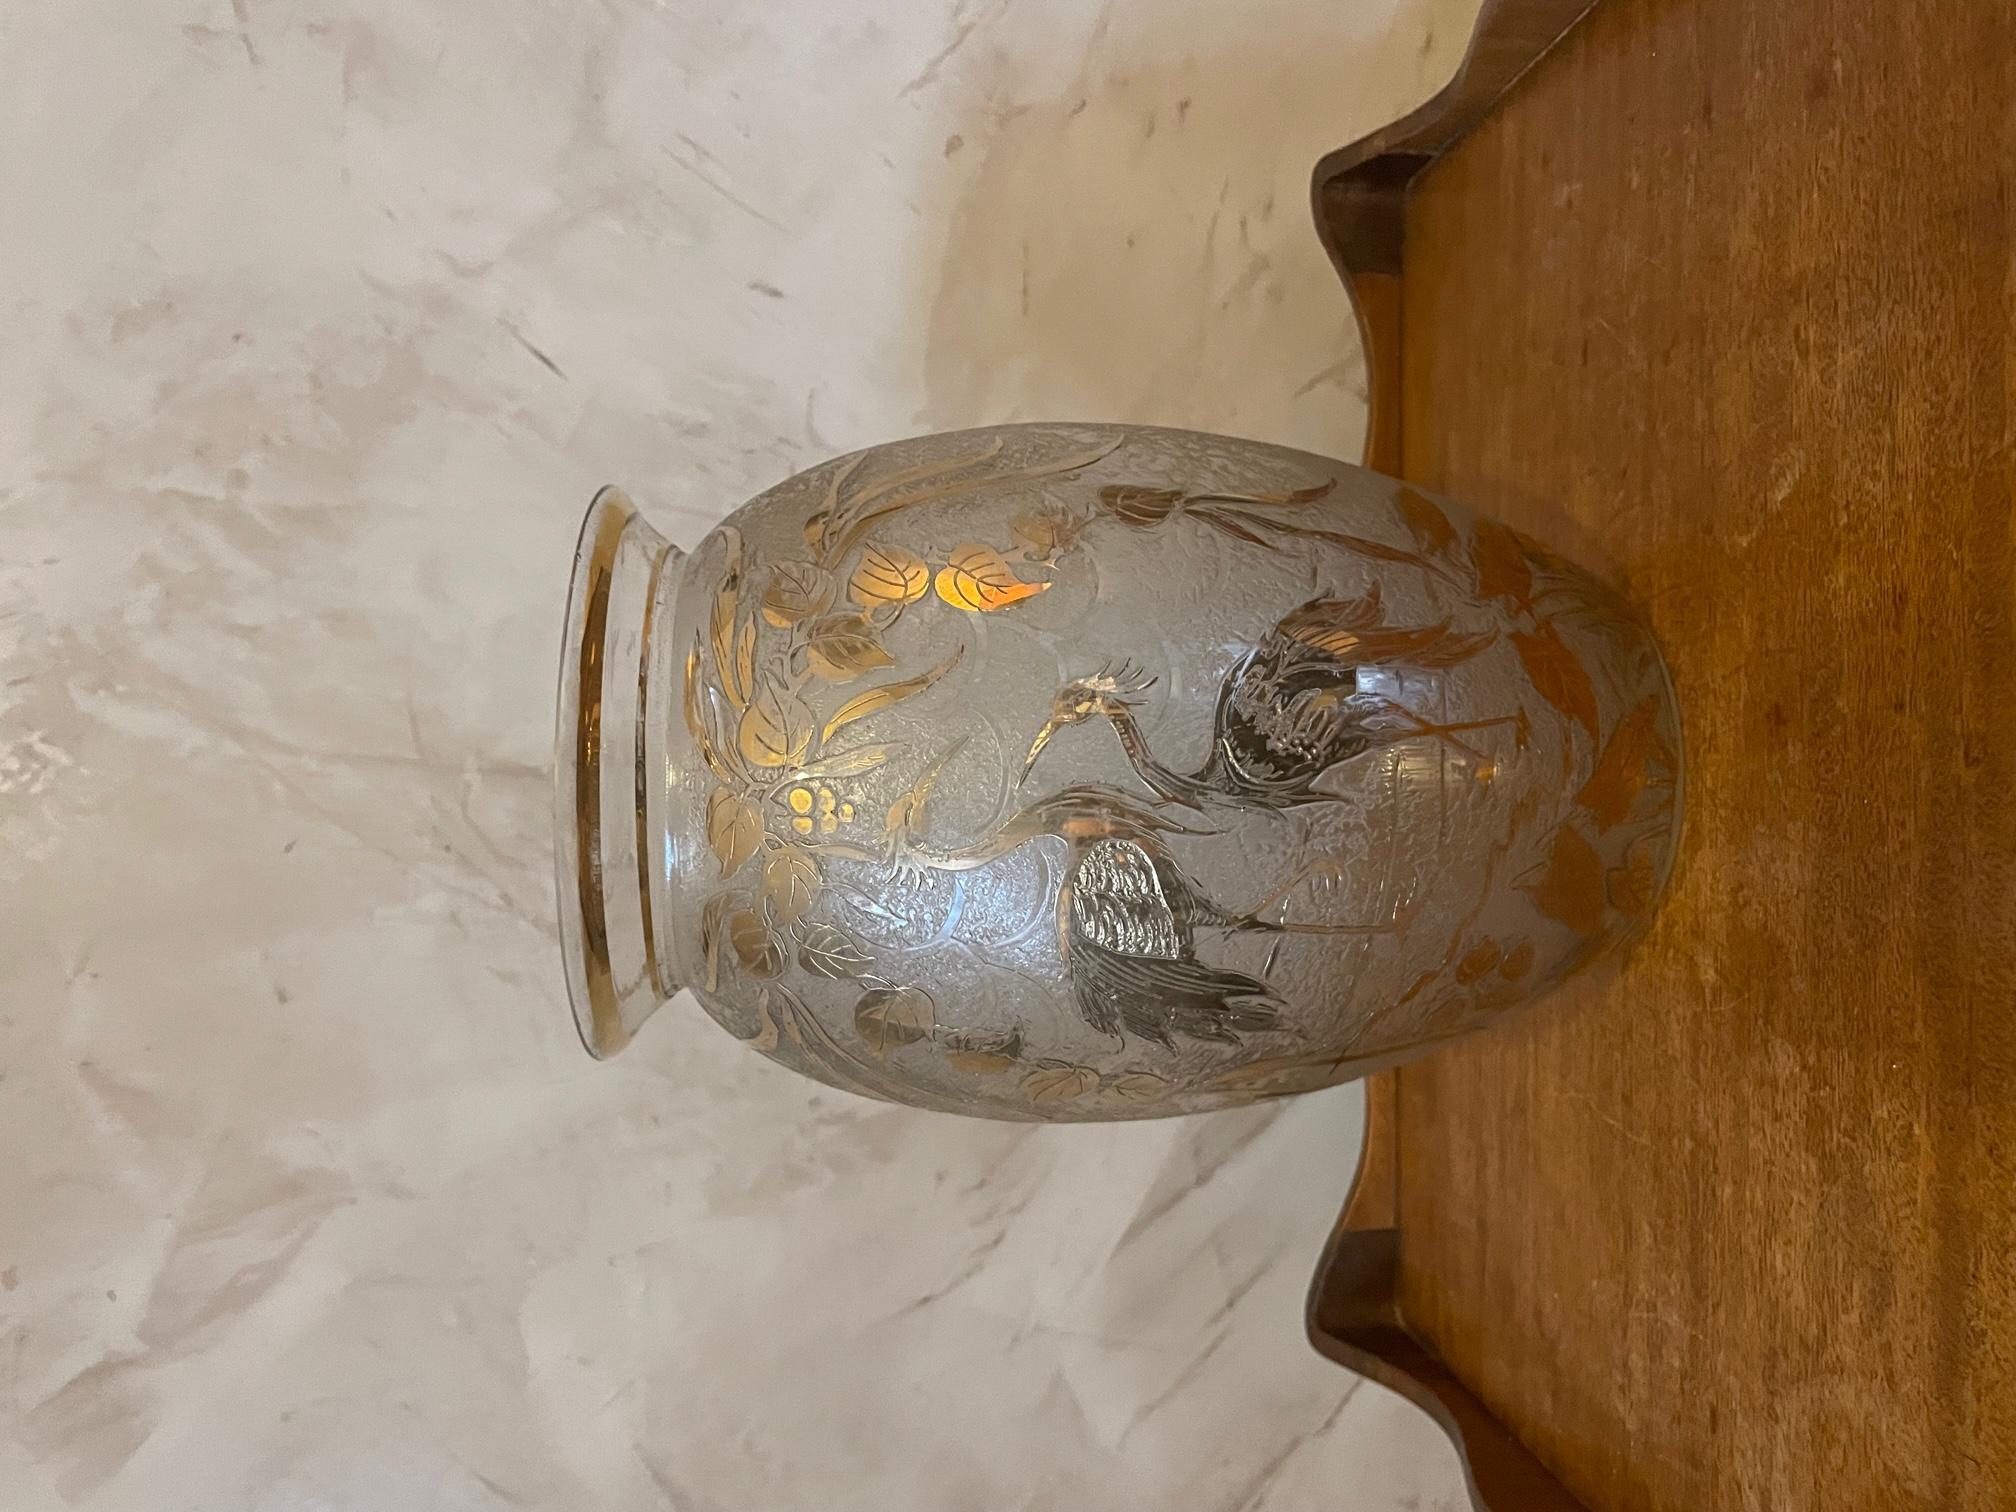 Beautiful 20th century French glass and gold bird and vegetation decoration. 
Very nice quality and condition. 